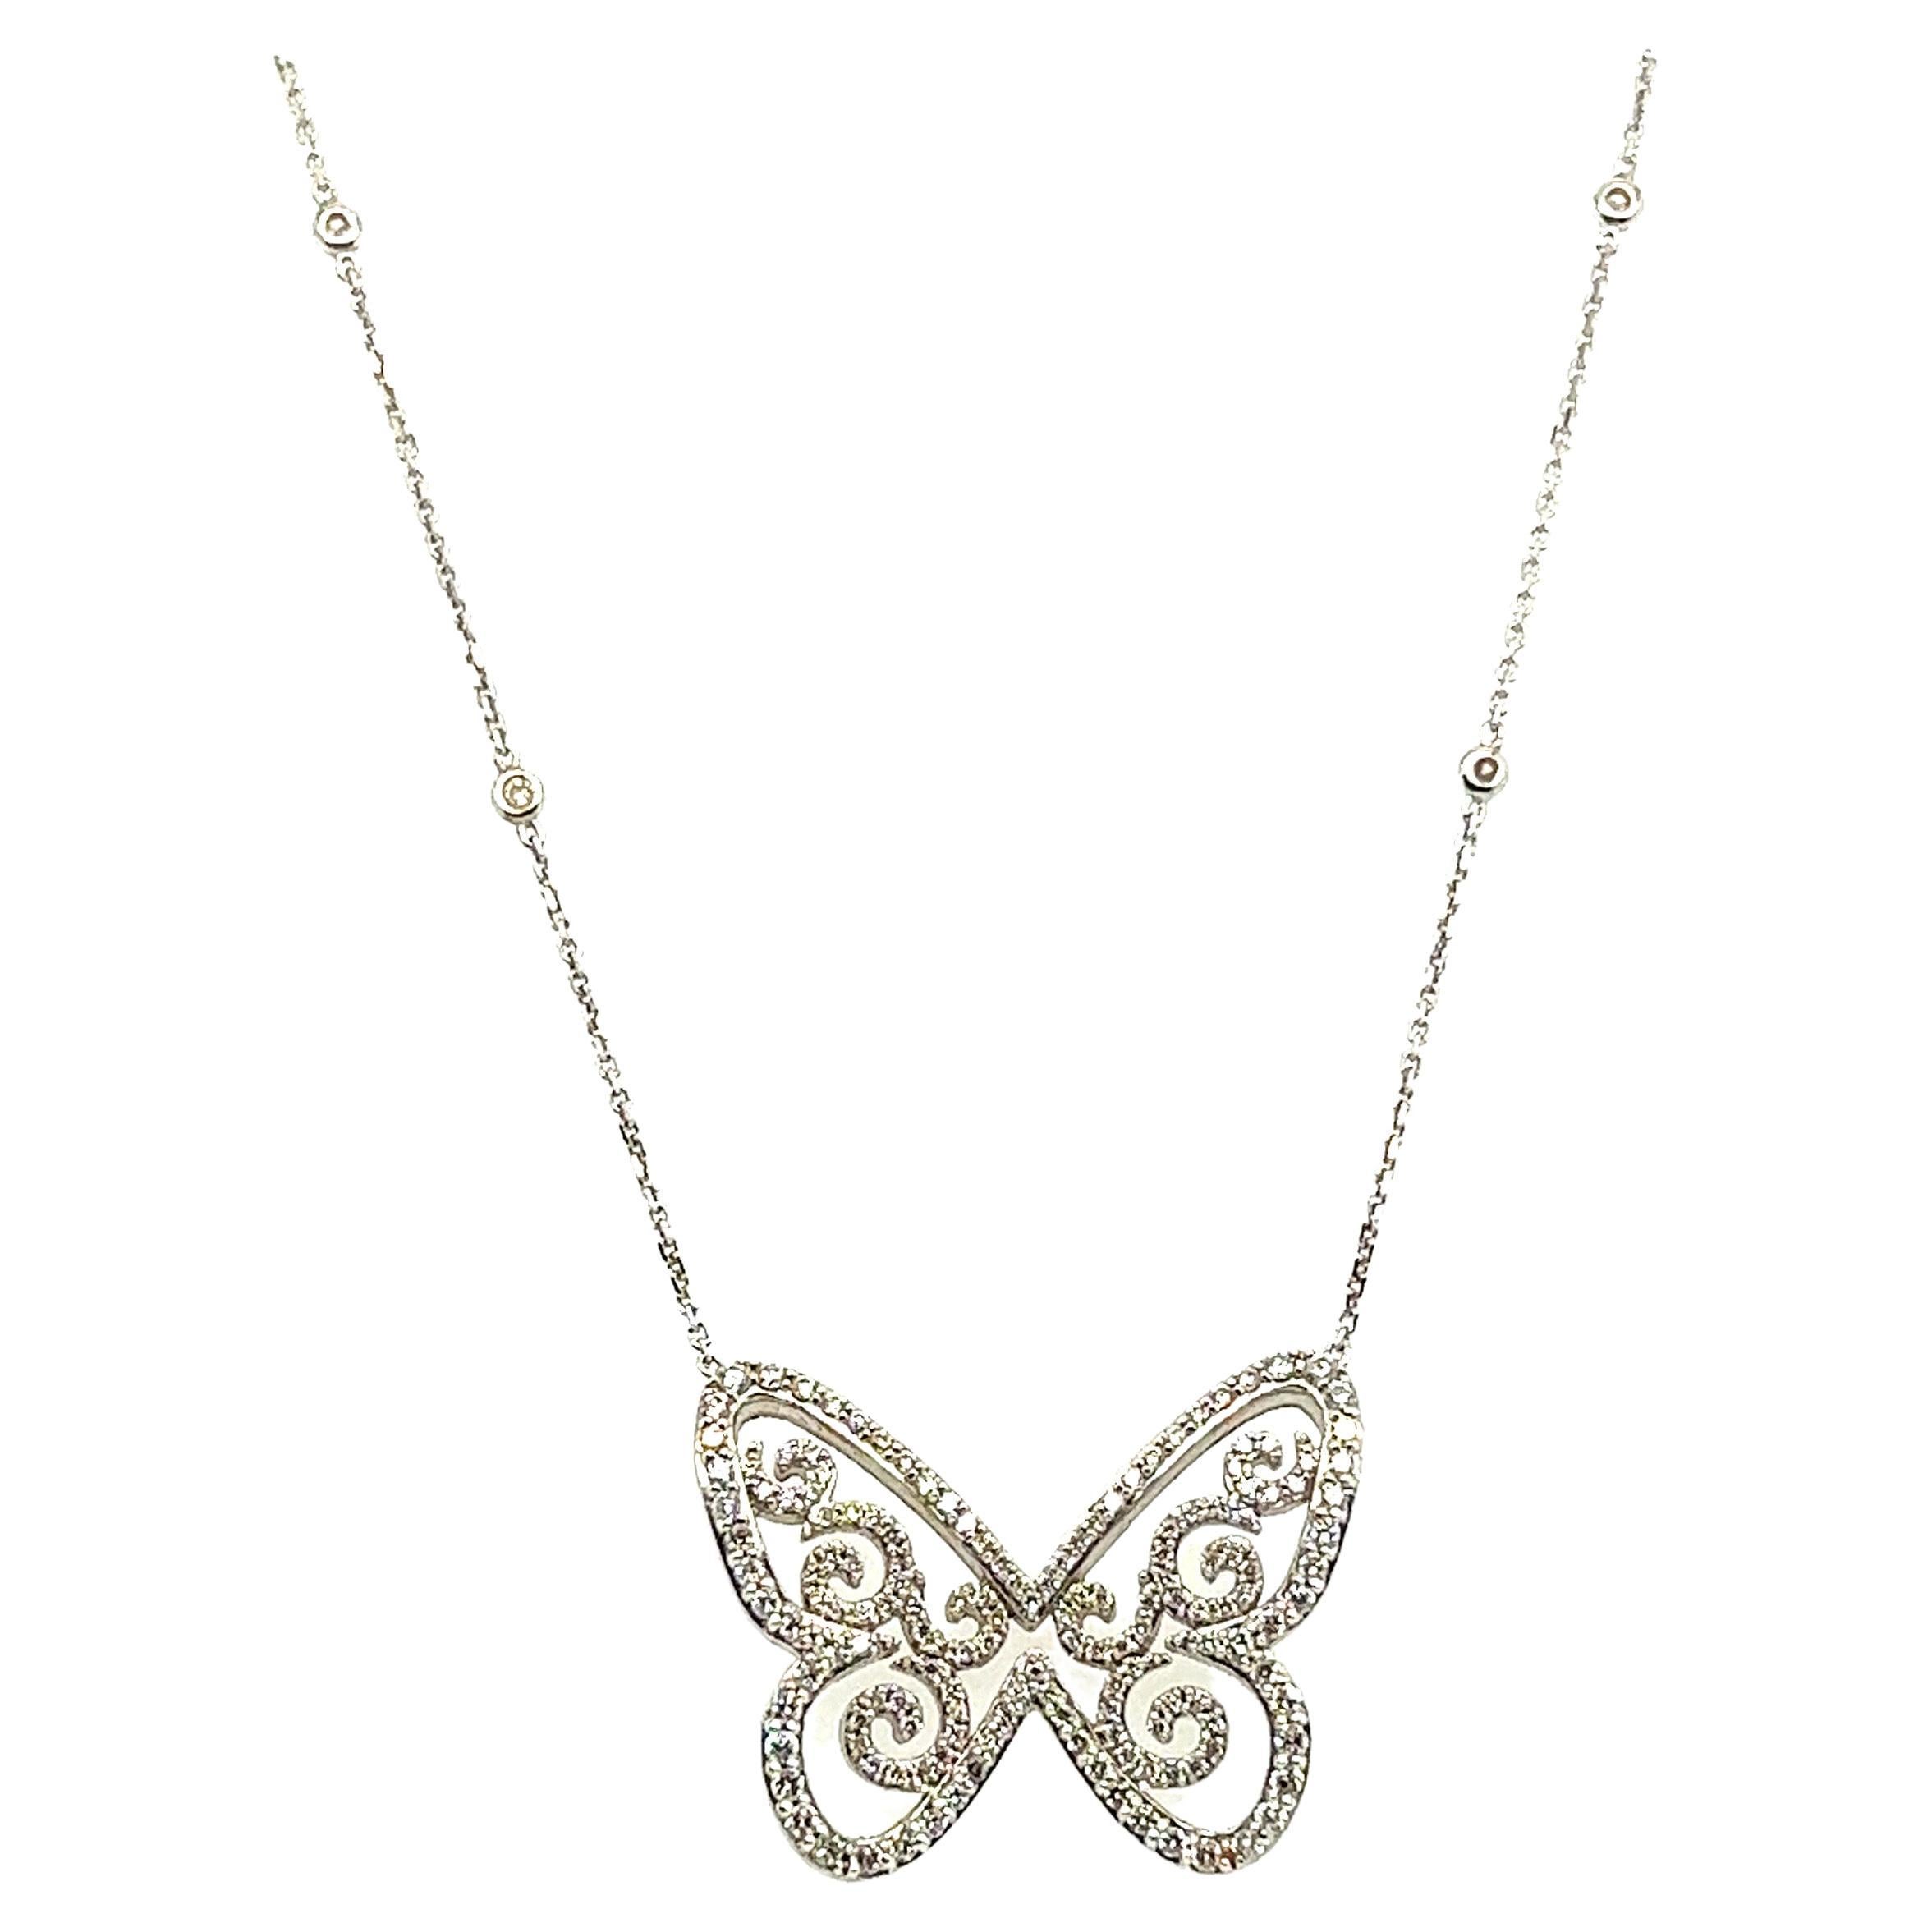 Messika "Butterfly" Pendant on an 18K White Gold Chain, Diamond Pavement